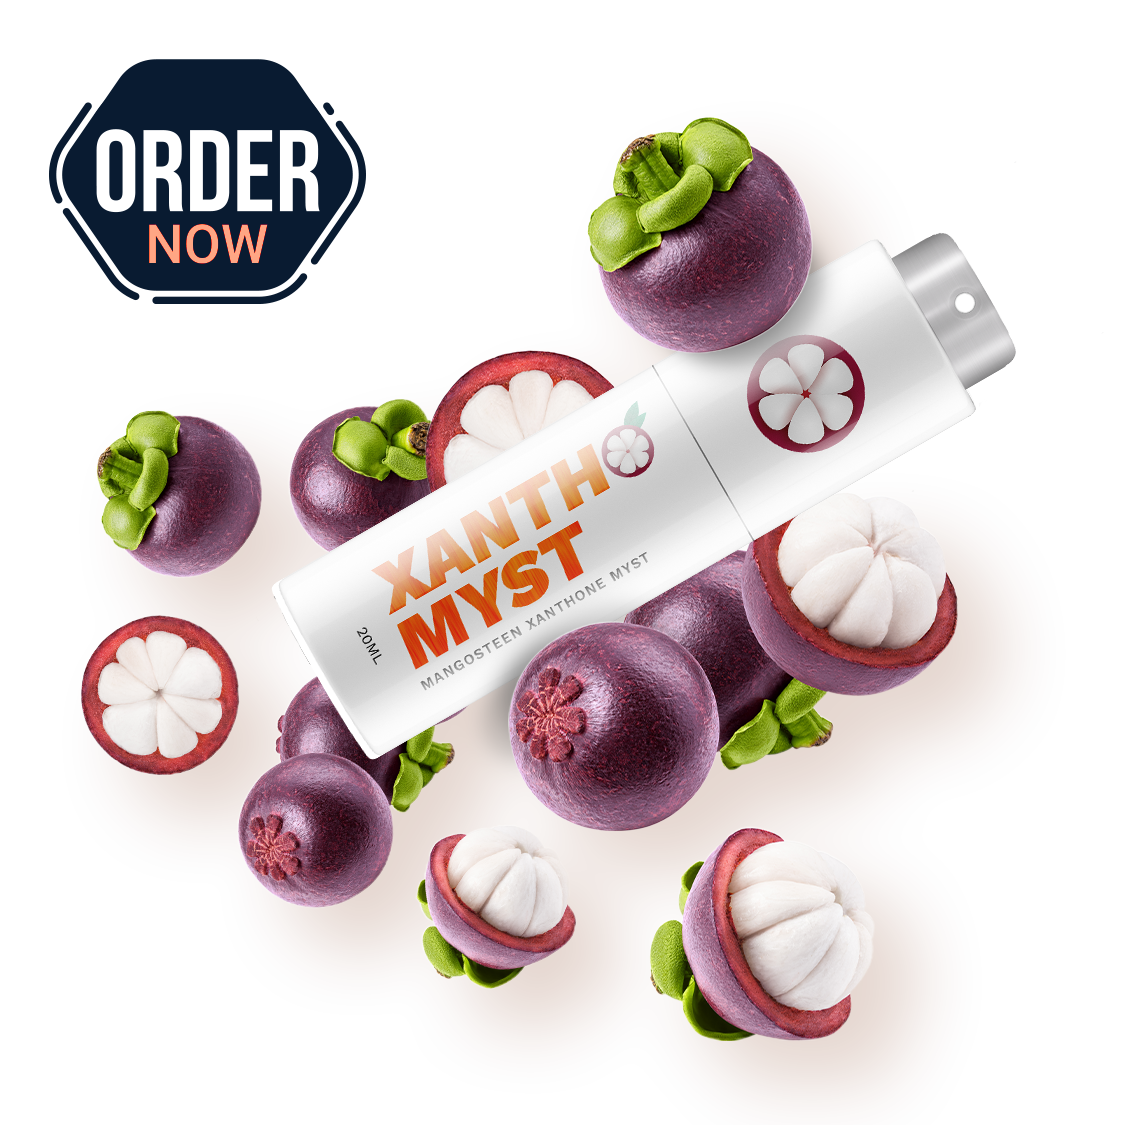 Mangosteen based product called Xanthomyst Irving TX